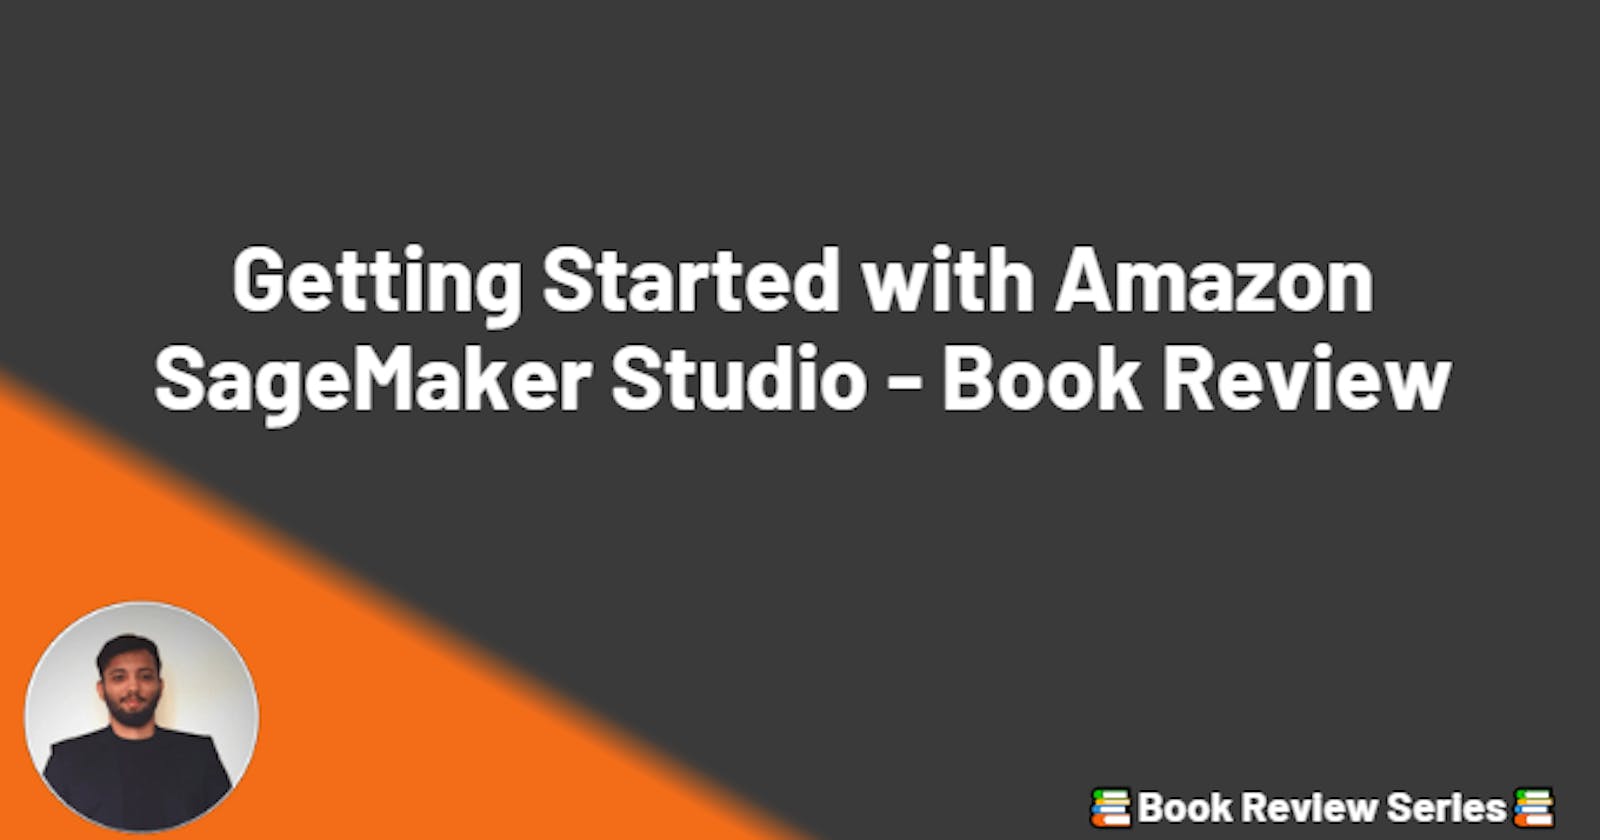 Getting Started with Amazon SageMaker Studio - Book Review